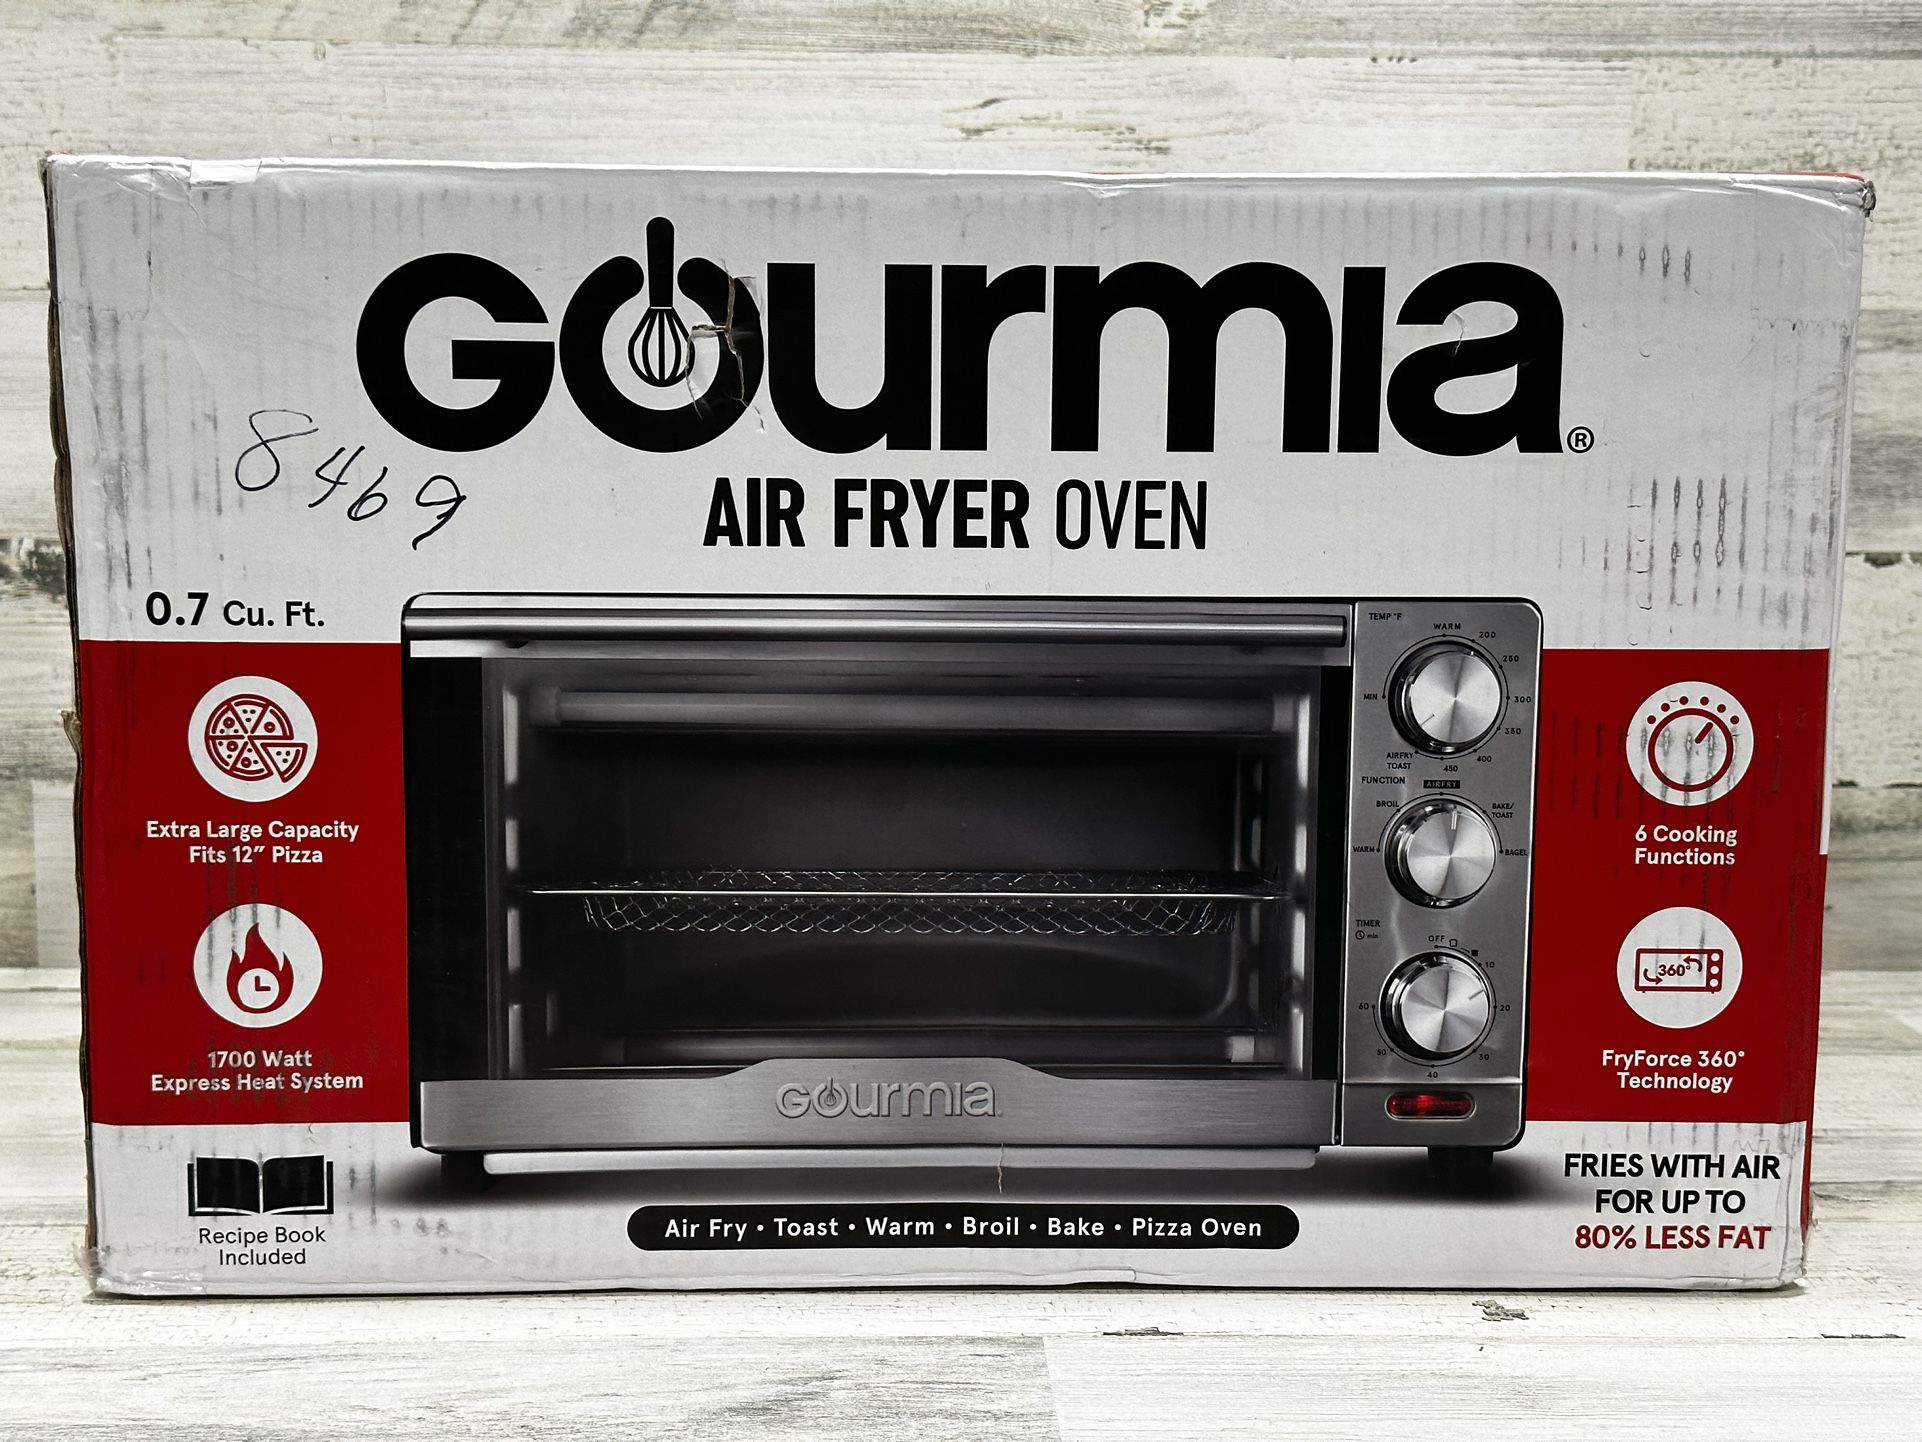 GOURMIA (#GTF7350) Air Fryer Oven - Air Fry/Toast/Warm/Broil/Bake/Pizza Oven - NEW!!!